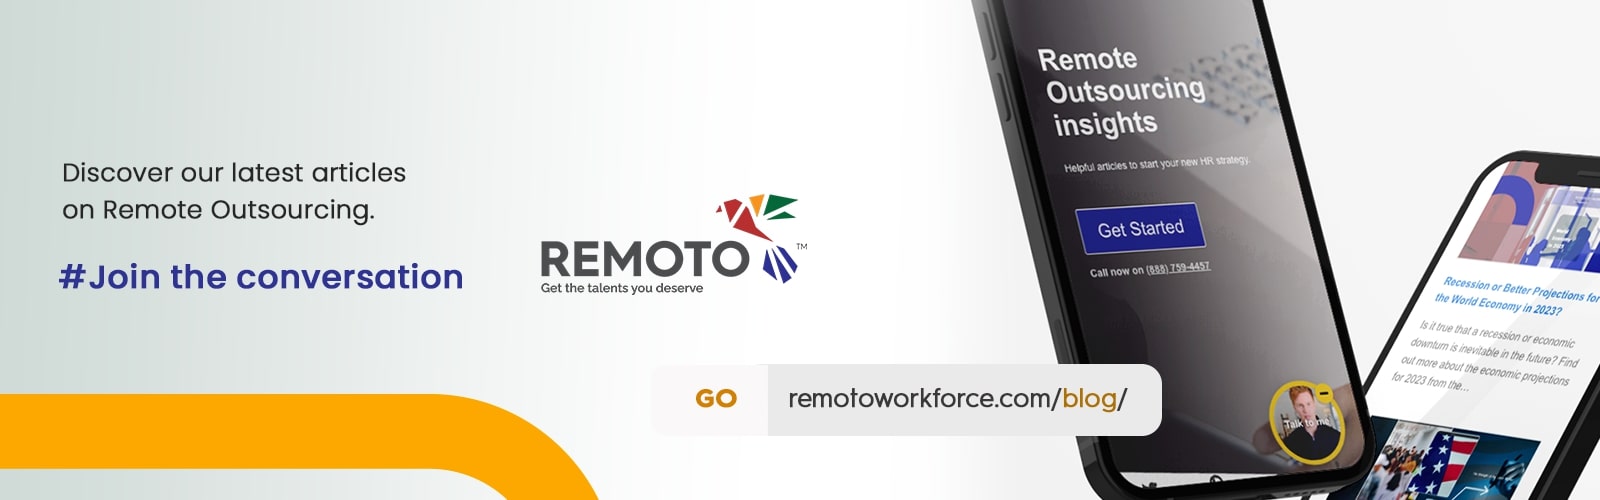 Learn How Top Recruiters Shortlisted the Best Candidates - Remoto Workforce